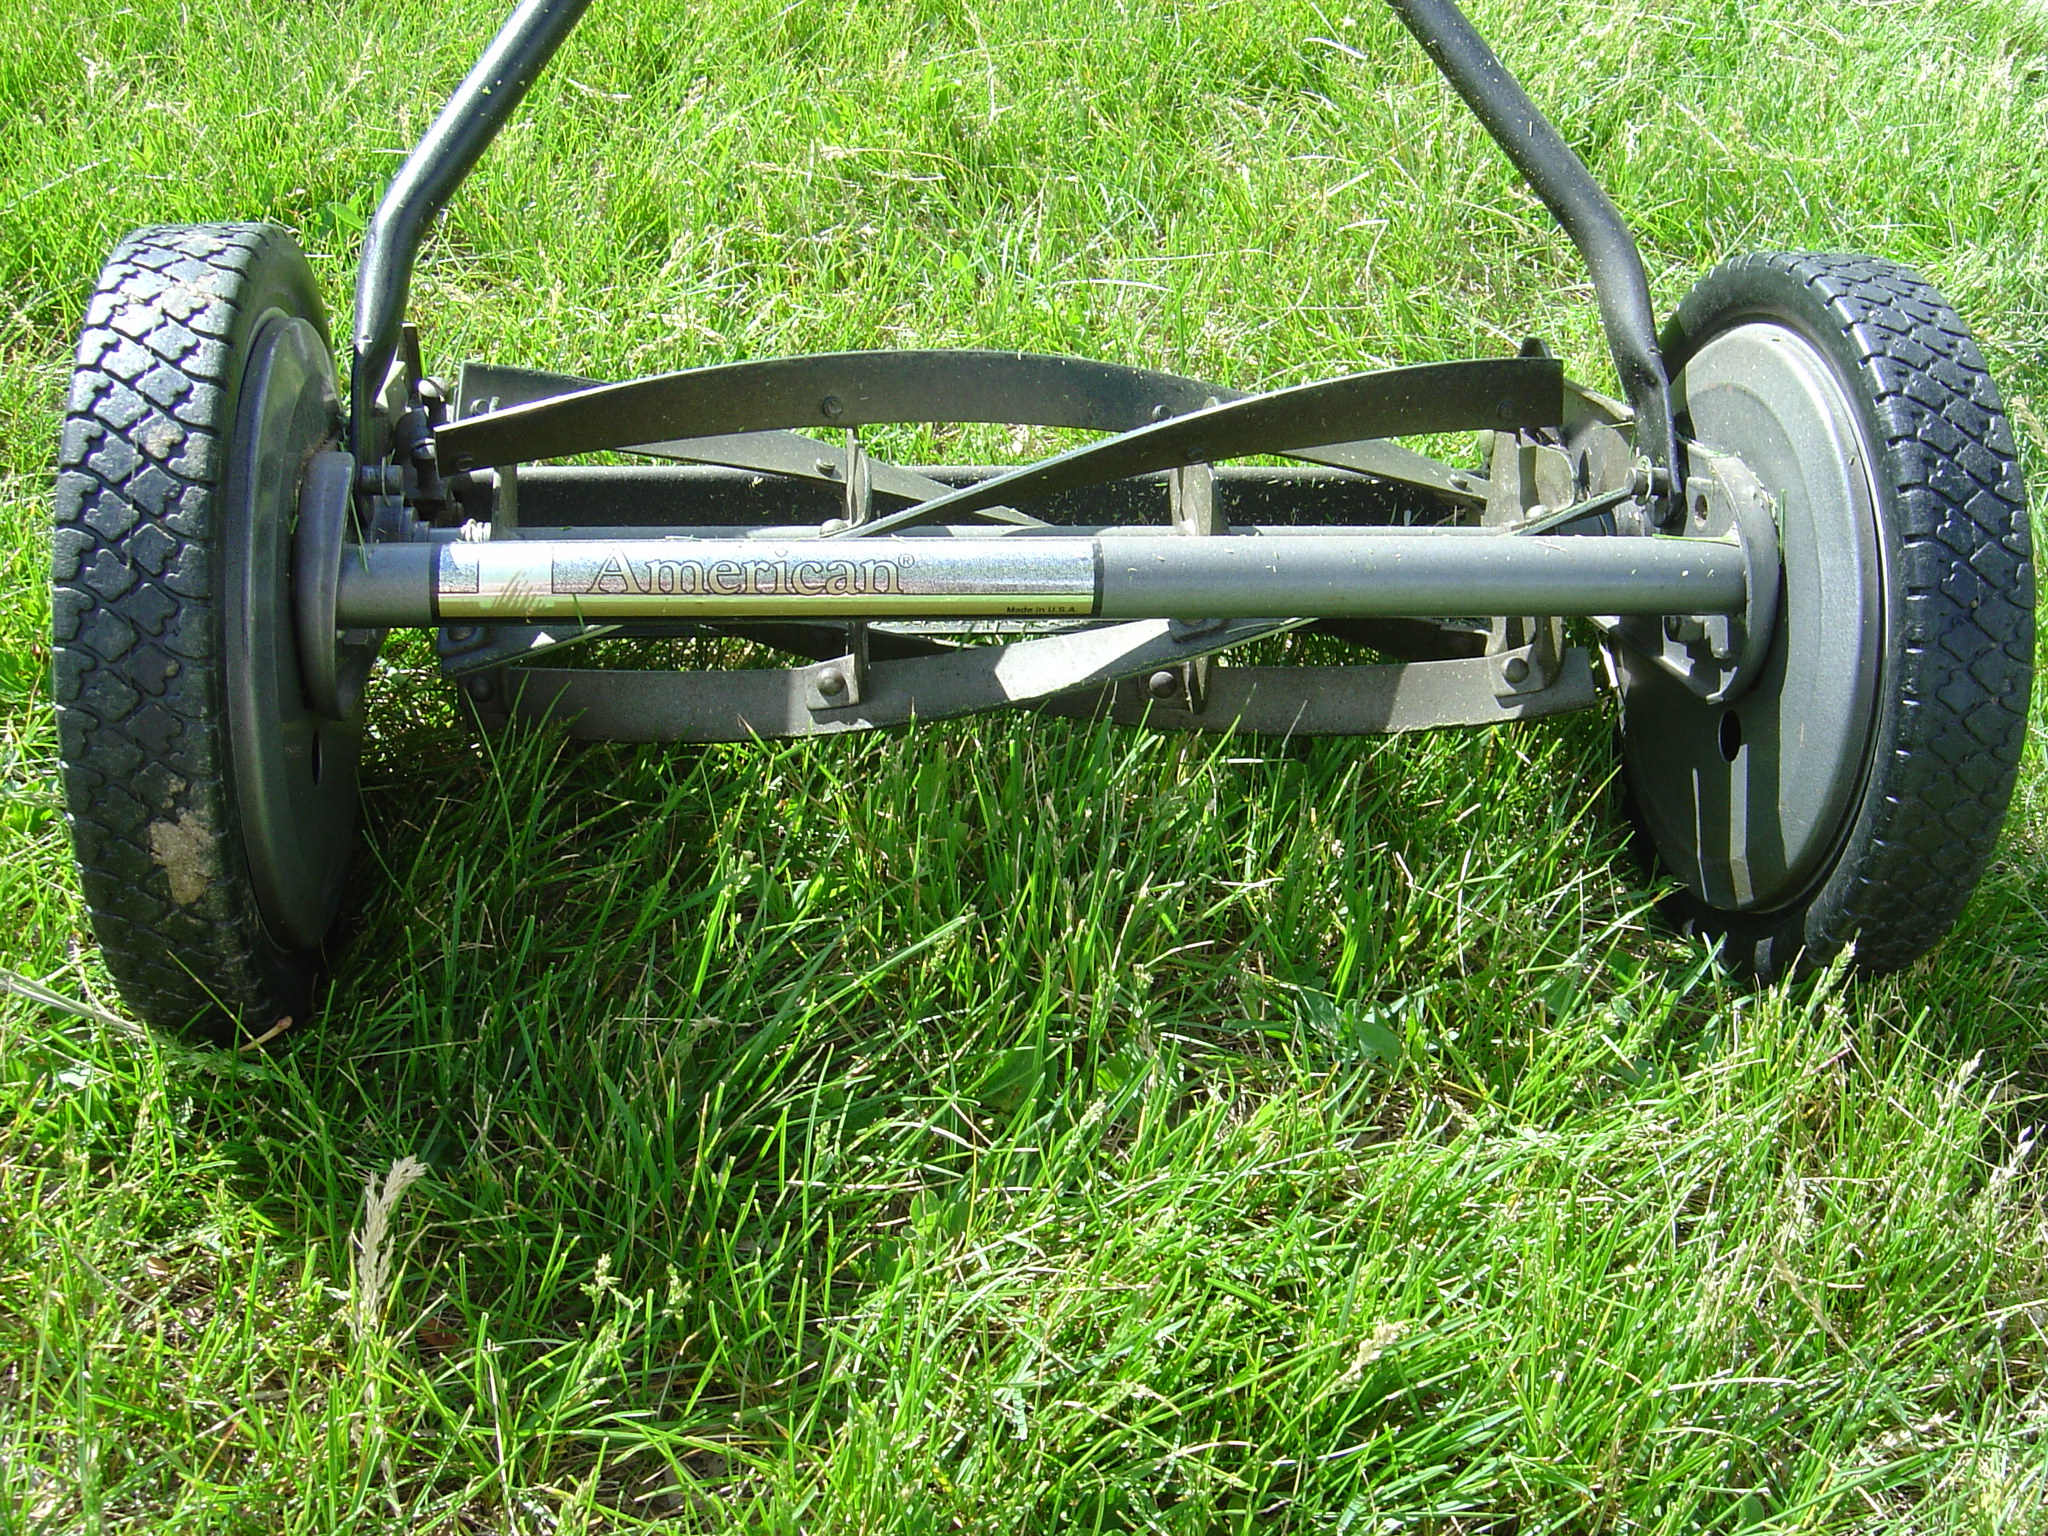 Relics: The push reel lawn mower • words and images